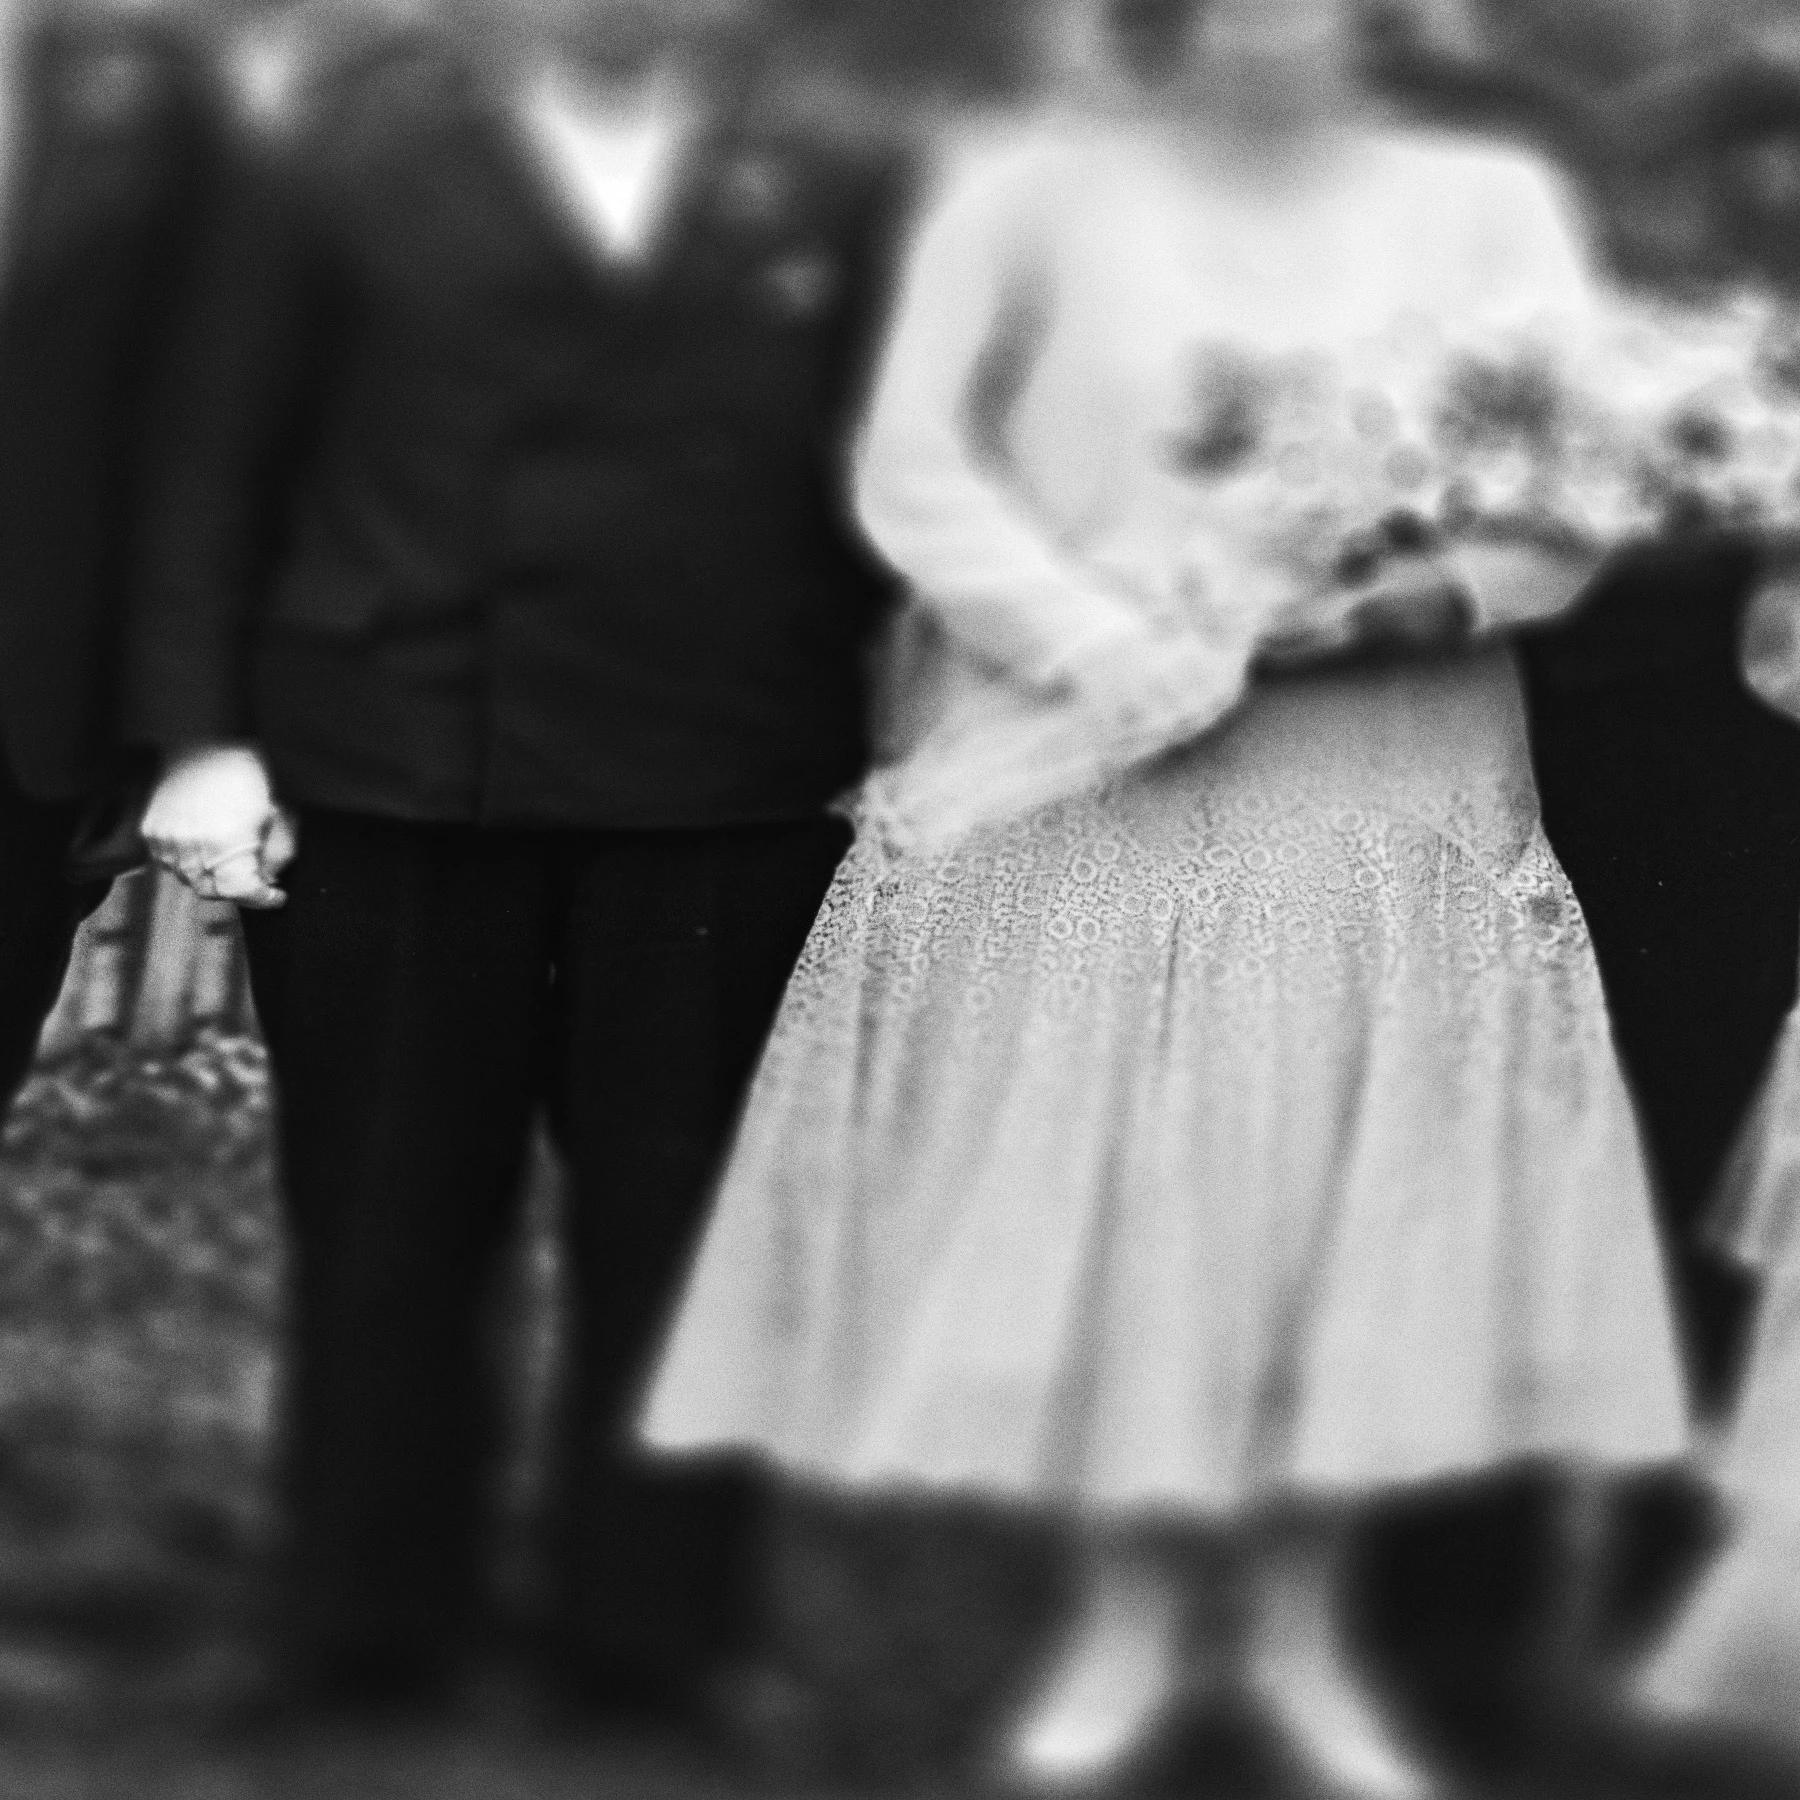 A man and woman stand together in formal wedding attire, she is holding flowers but both their heads and feet are blurry. 